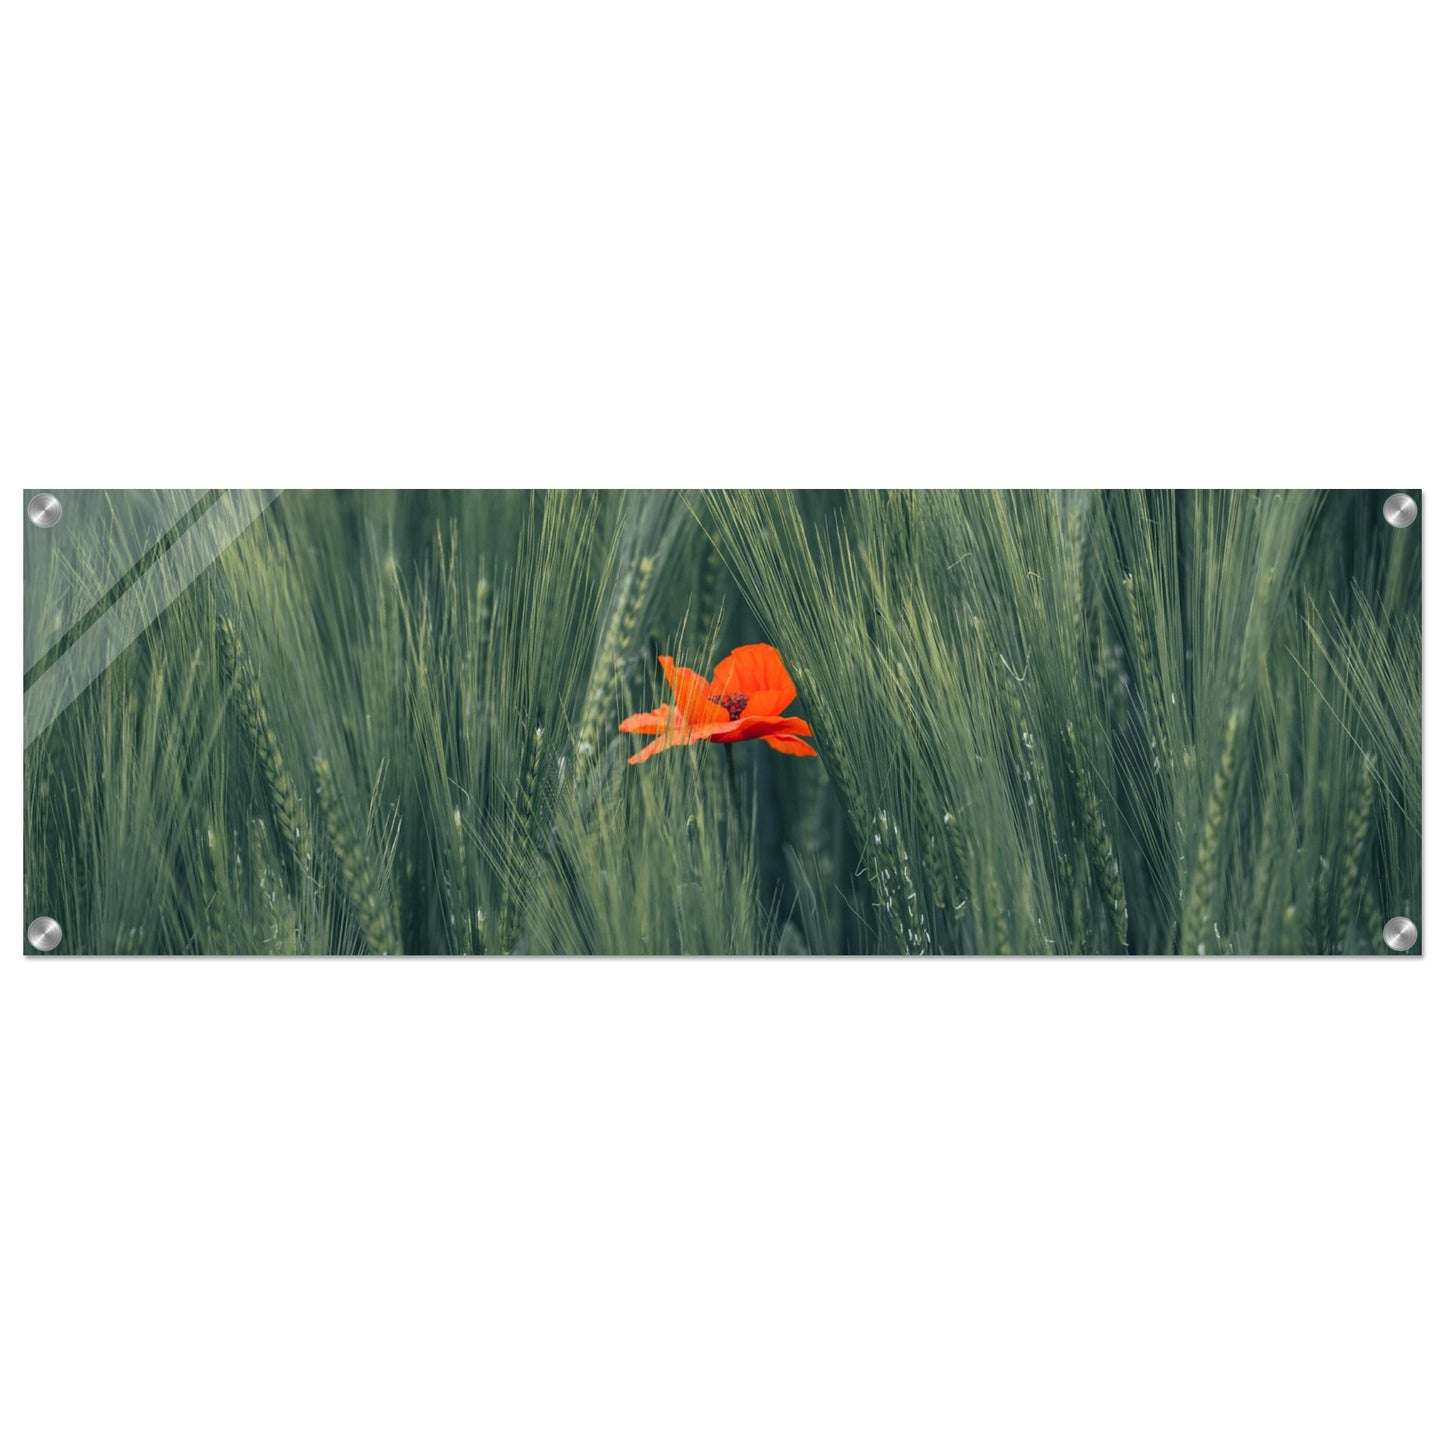 Red Flower in Green Wheat Field - Acrylic Glass Print